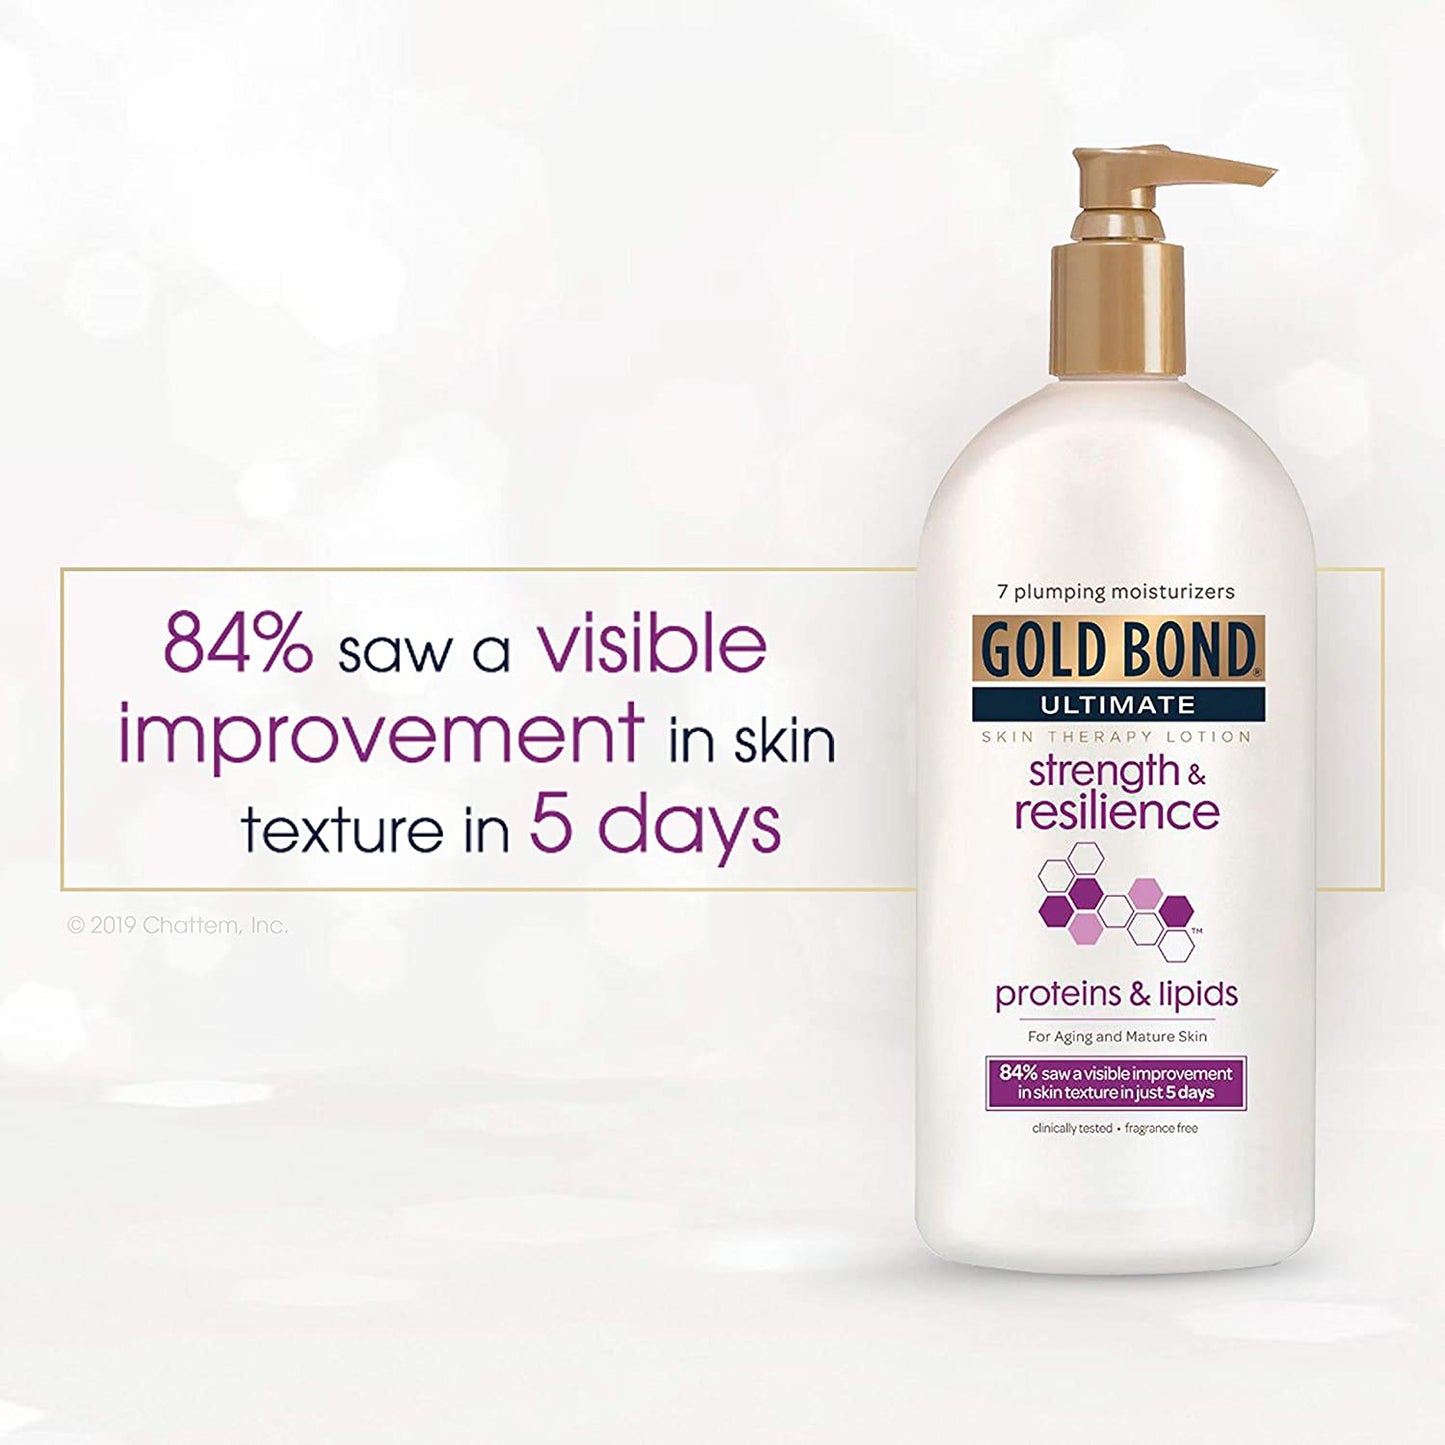 Gold Bond Ultimate Strength & Resilience Skin Therapy Lotion, 13 oz for Aging and Mature Skin